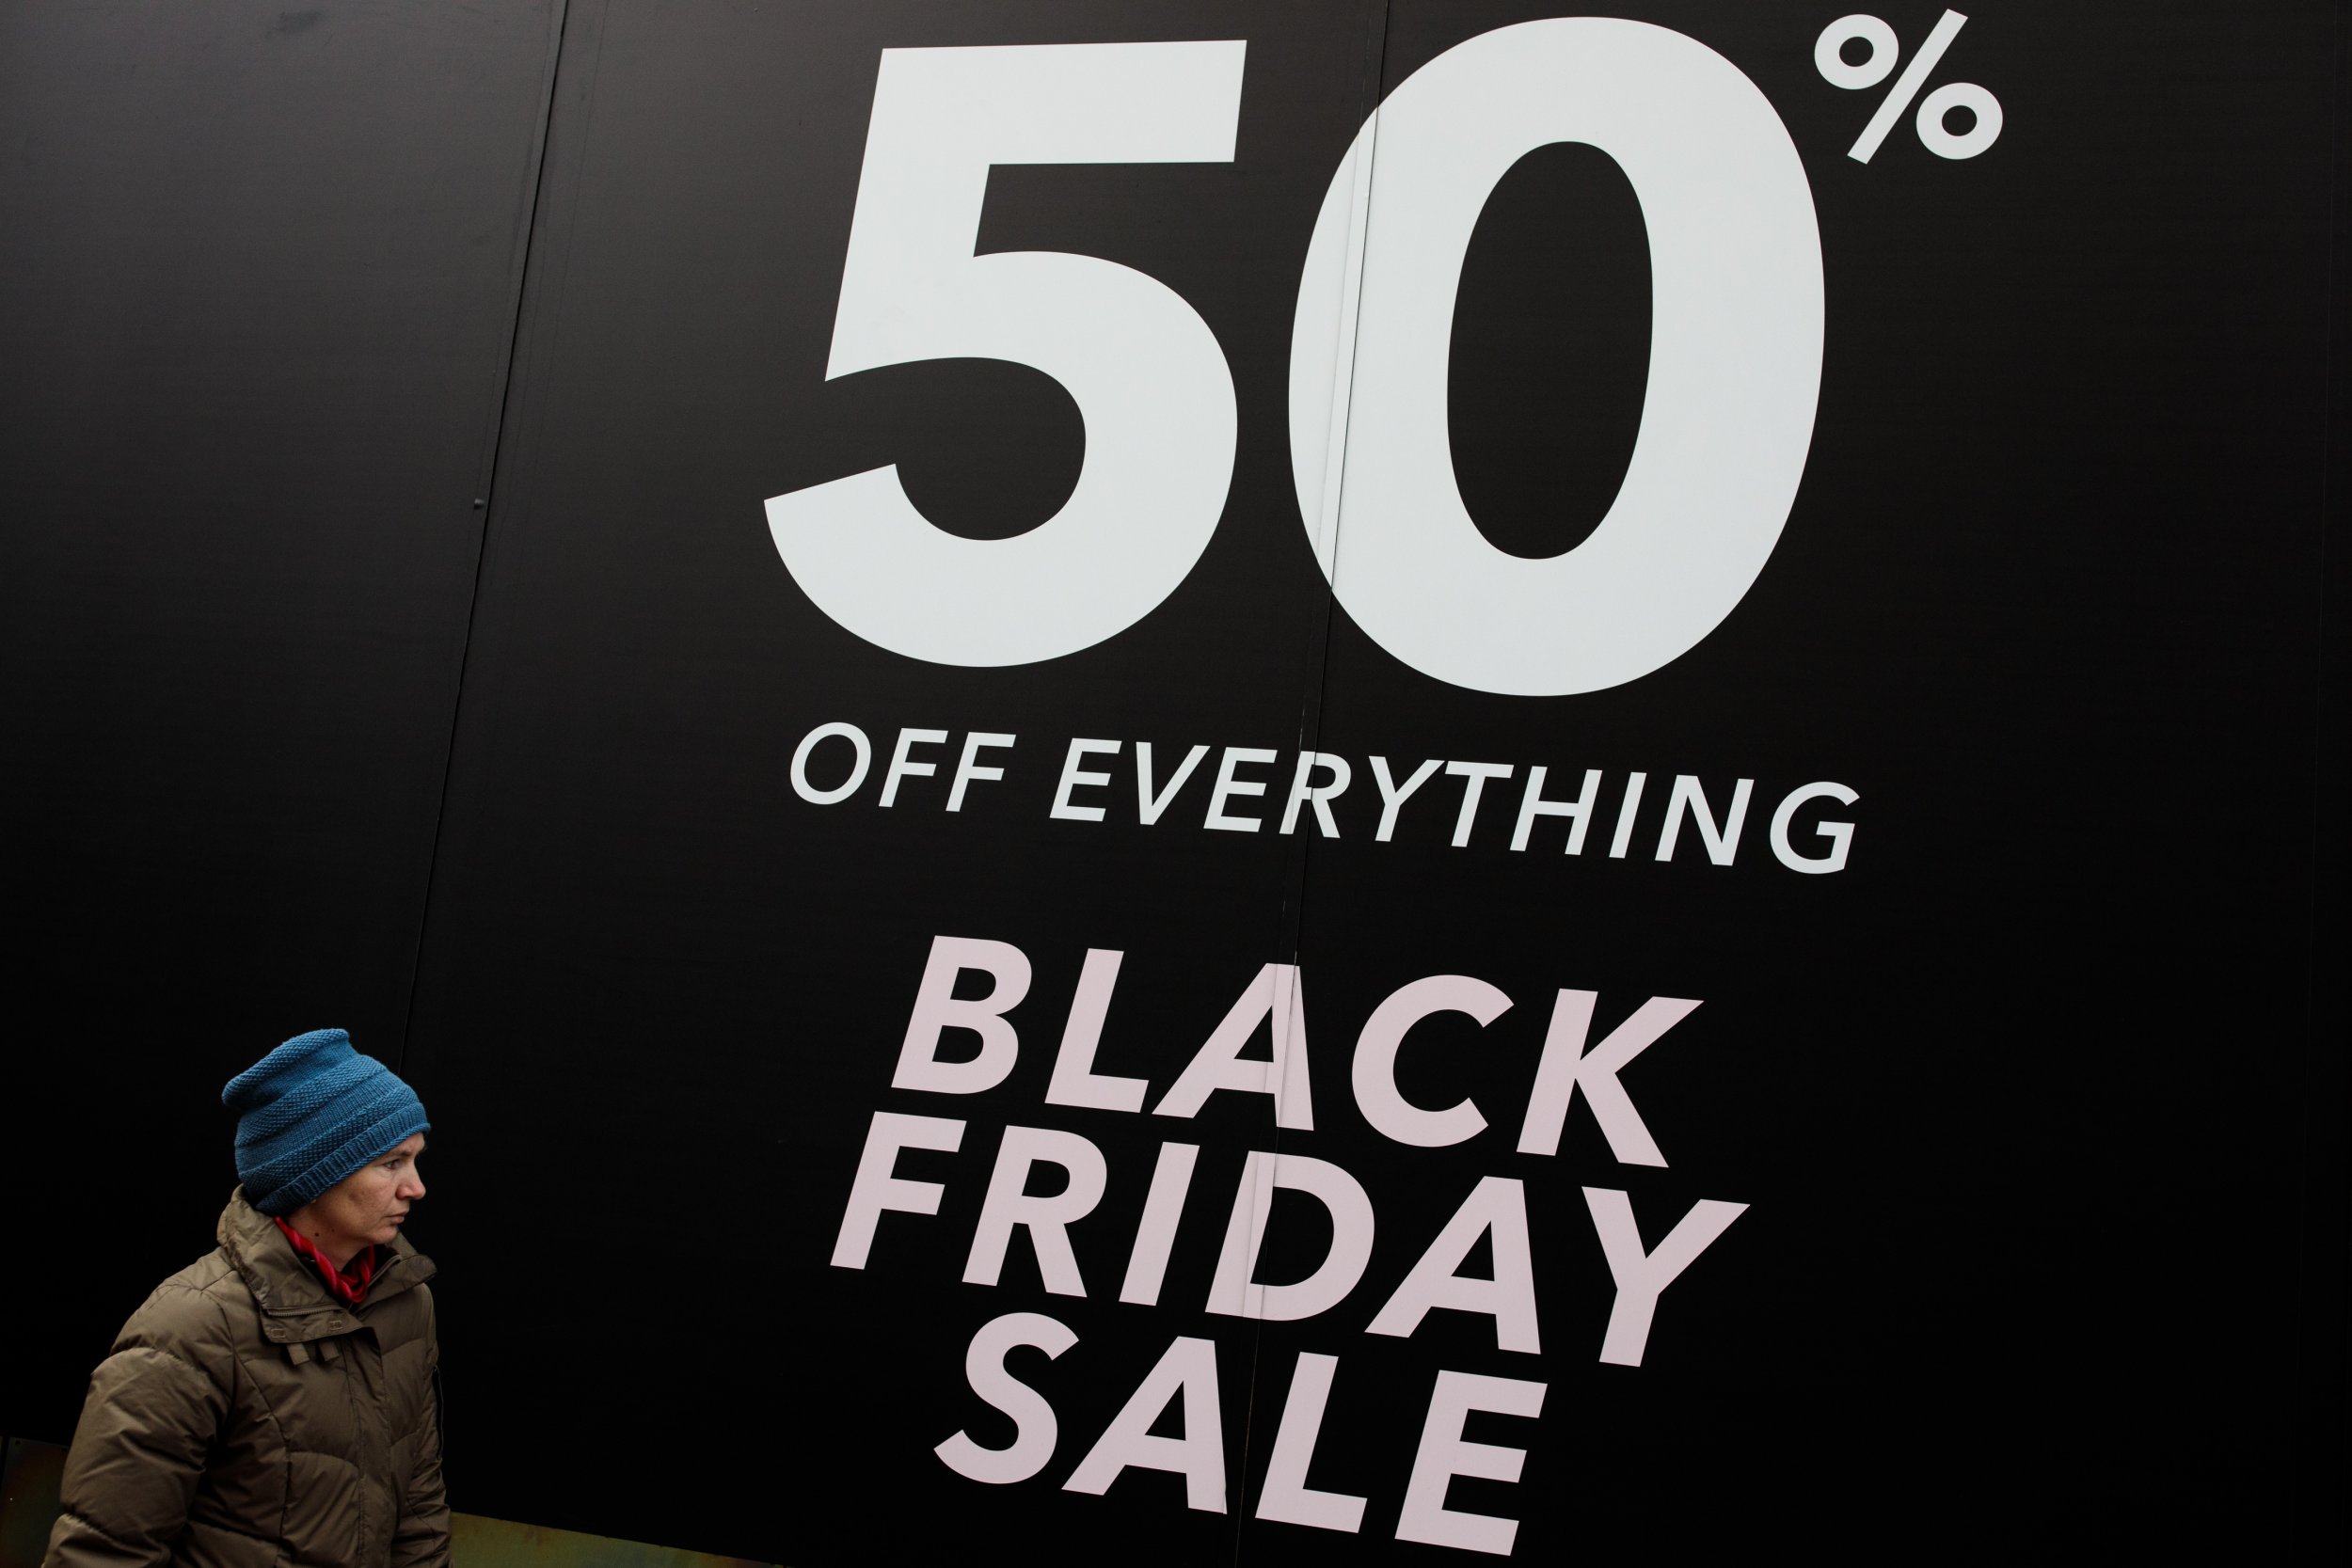 Why Is It Called Black Friday, Cyber Monday? When Are They in 2018? - Will There Ve More Black Friday Deals